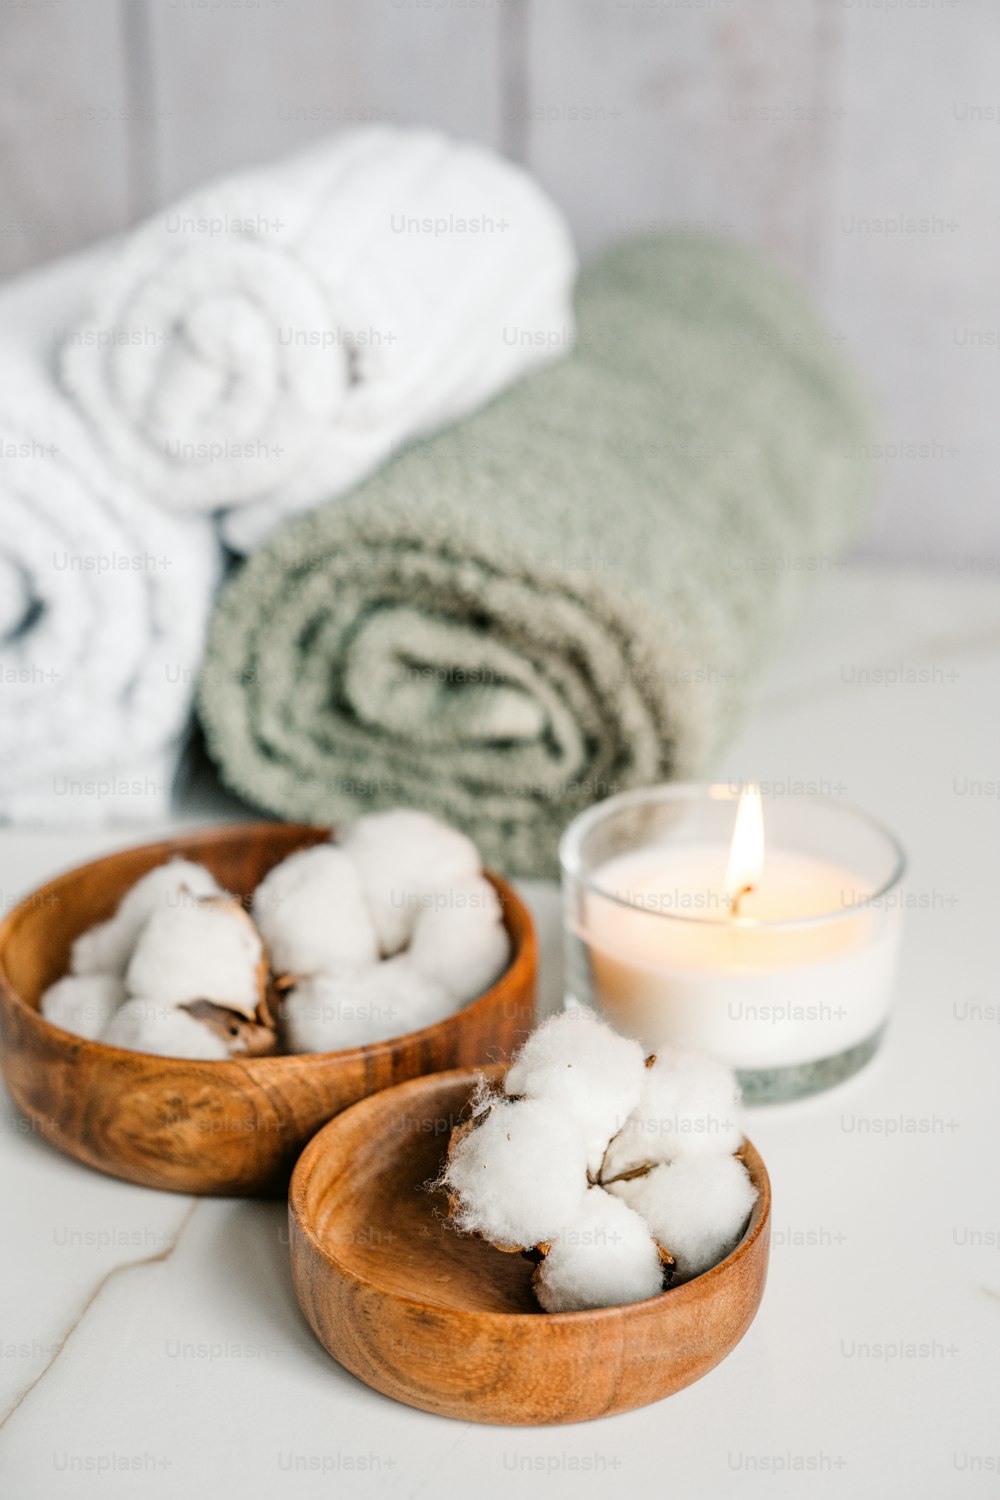 a couple of bowls filled with cotton next to a candle